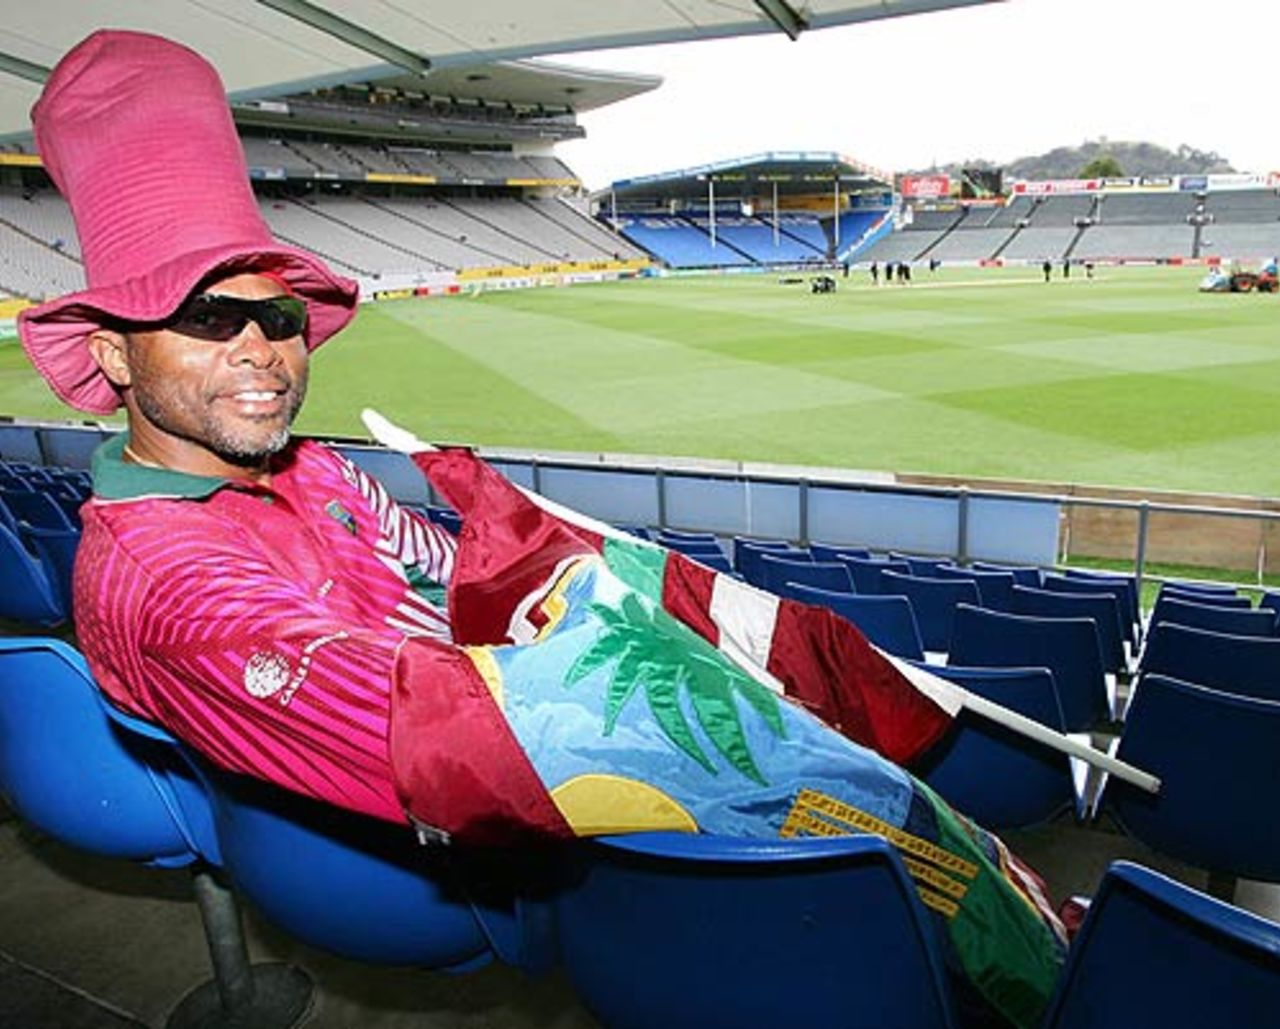 Peter Matthews, a West Indies fan, relaxes in the stands during a rain-affected day, New Zealand v West Indies, 1st Test, Auckland, 4th day, March 12, 2006